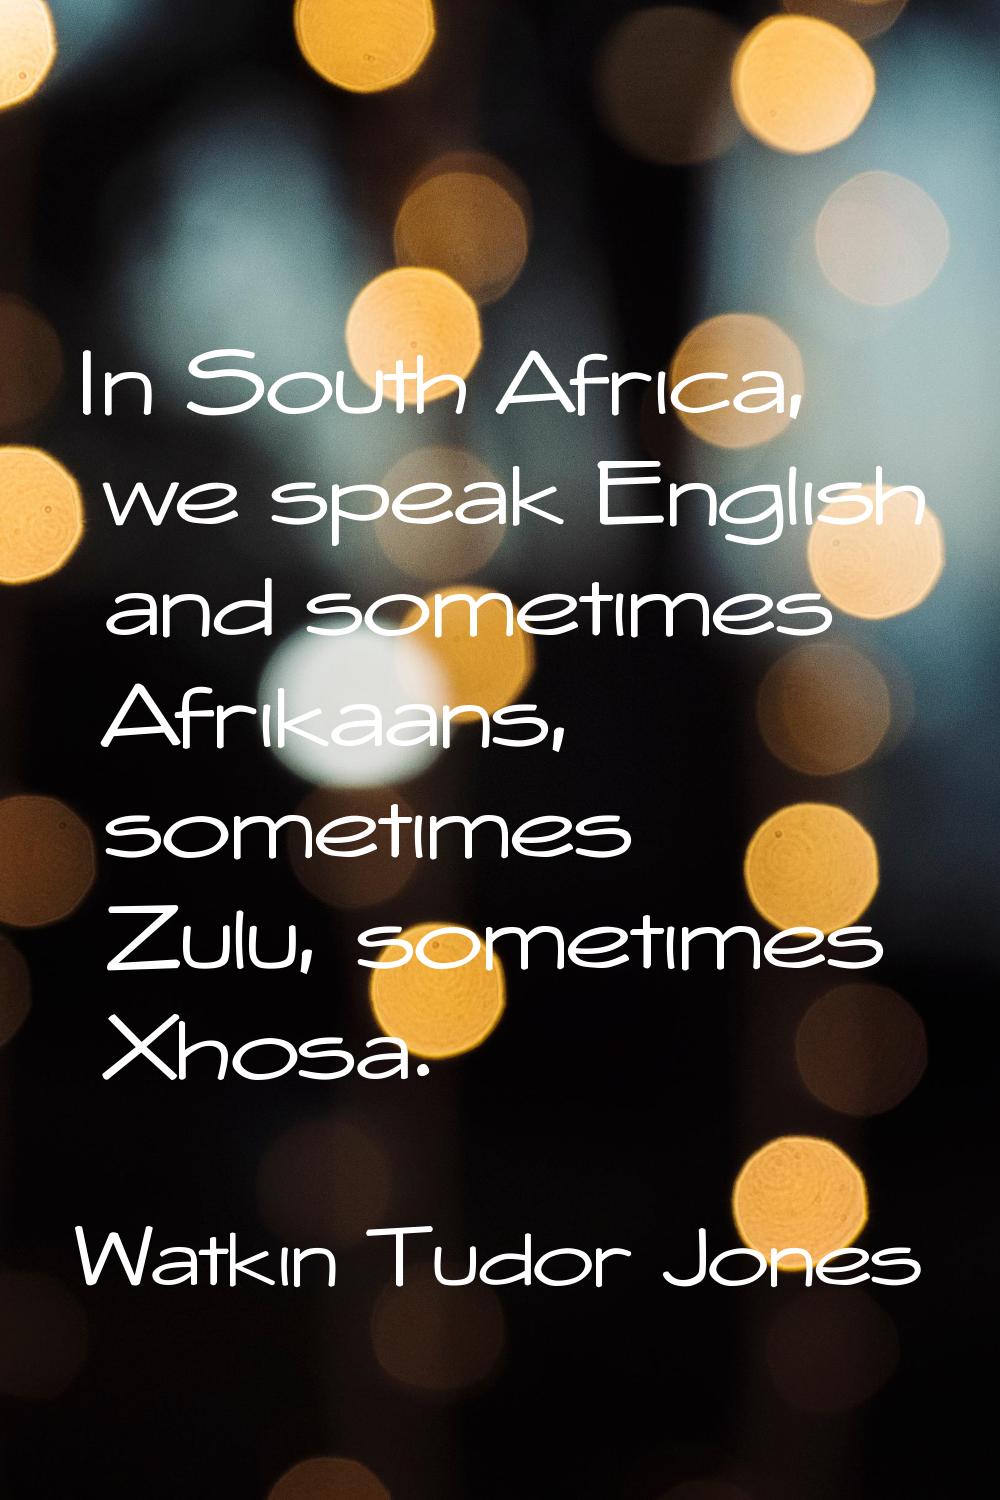 In South Africa, we speak English and sometimes Afrikaans, sometimes Zulu, sometimes Xhosa.